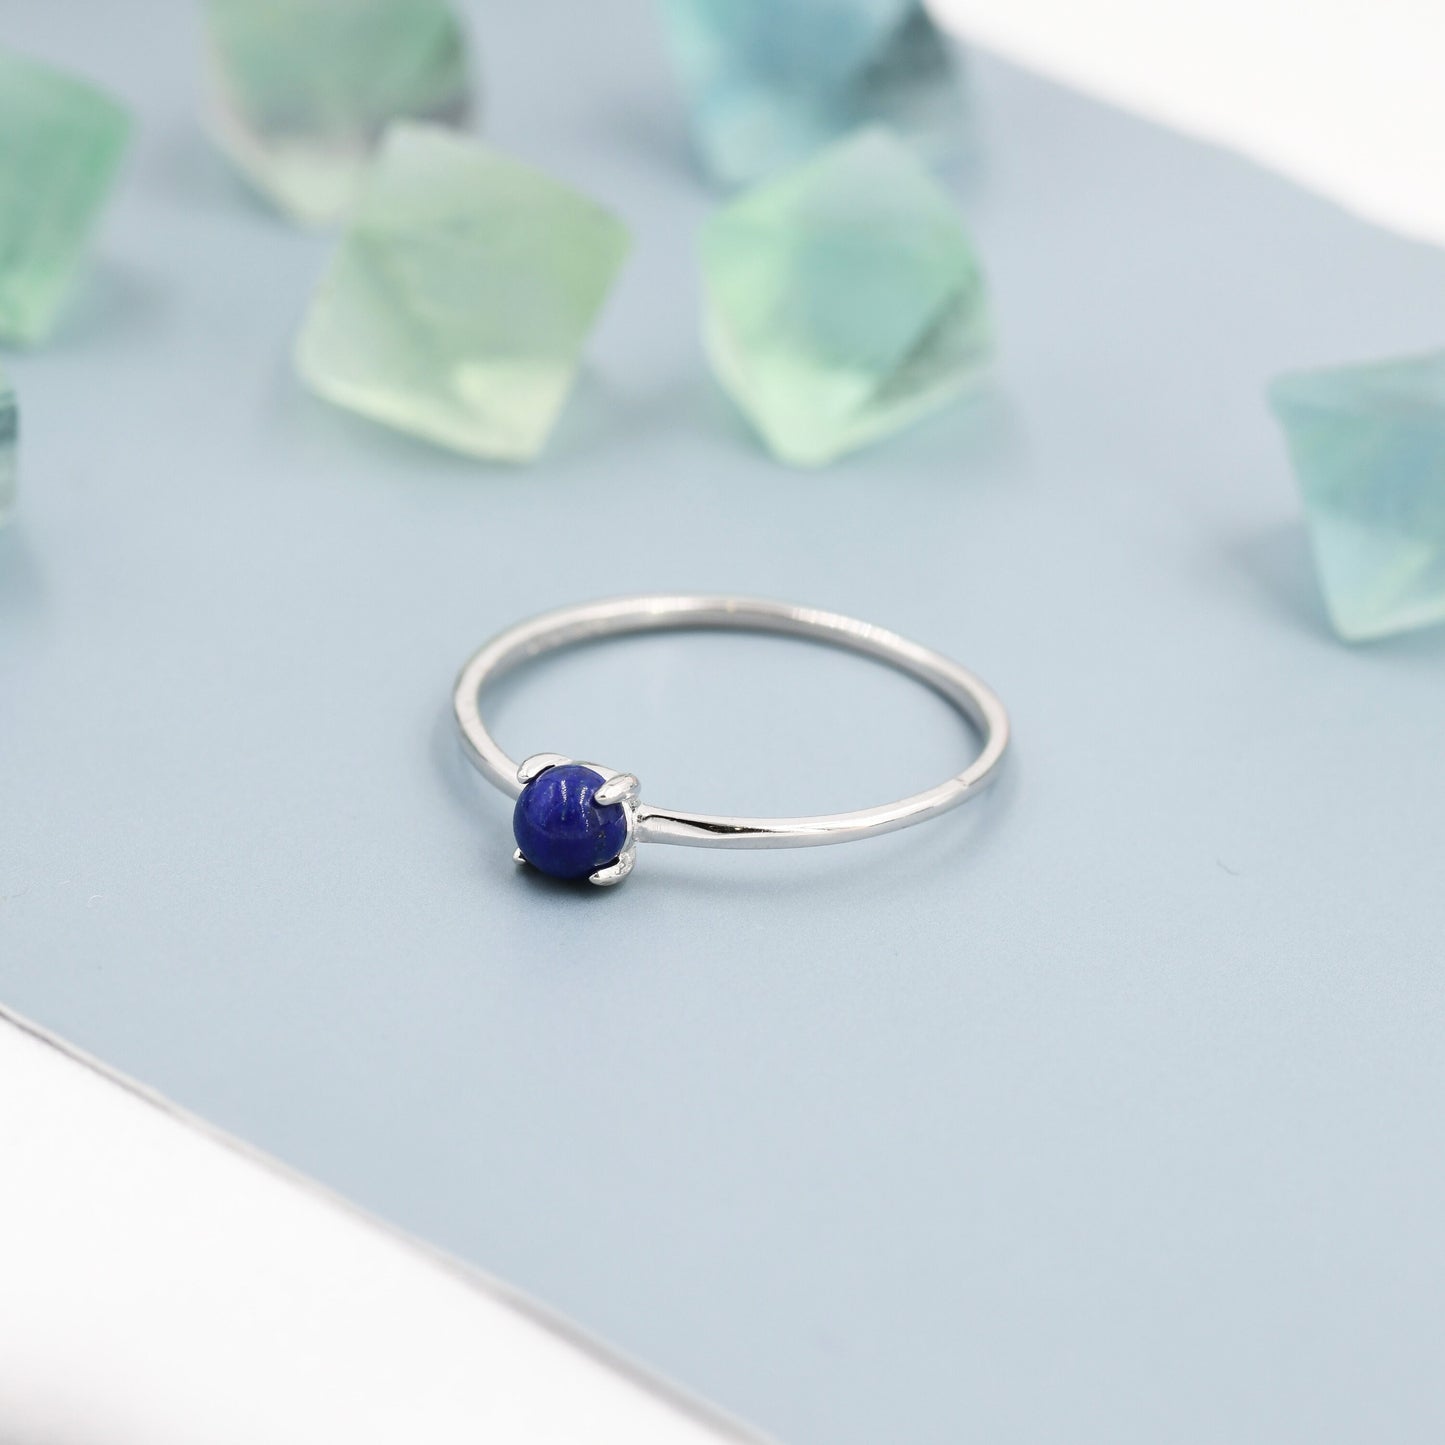 Lapis Lazuli Ring in Sterling Silver, US 5 - 8, Natural Lapis Lazuli Ring, Simple Gemstone Ring, Semi-Precious, Genuine Stone